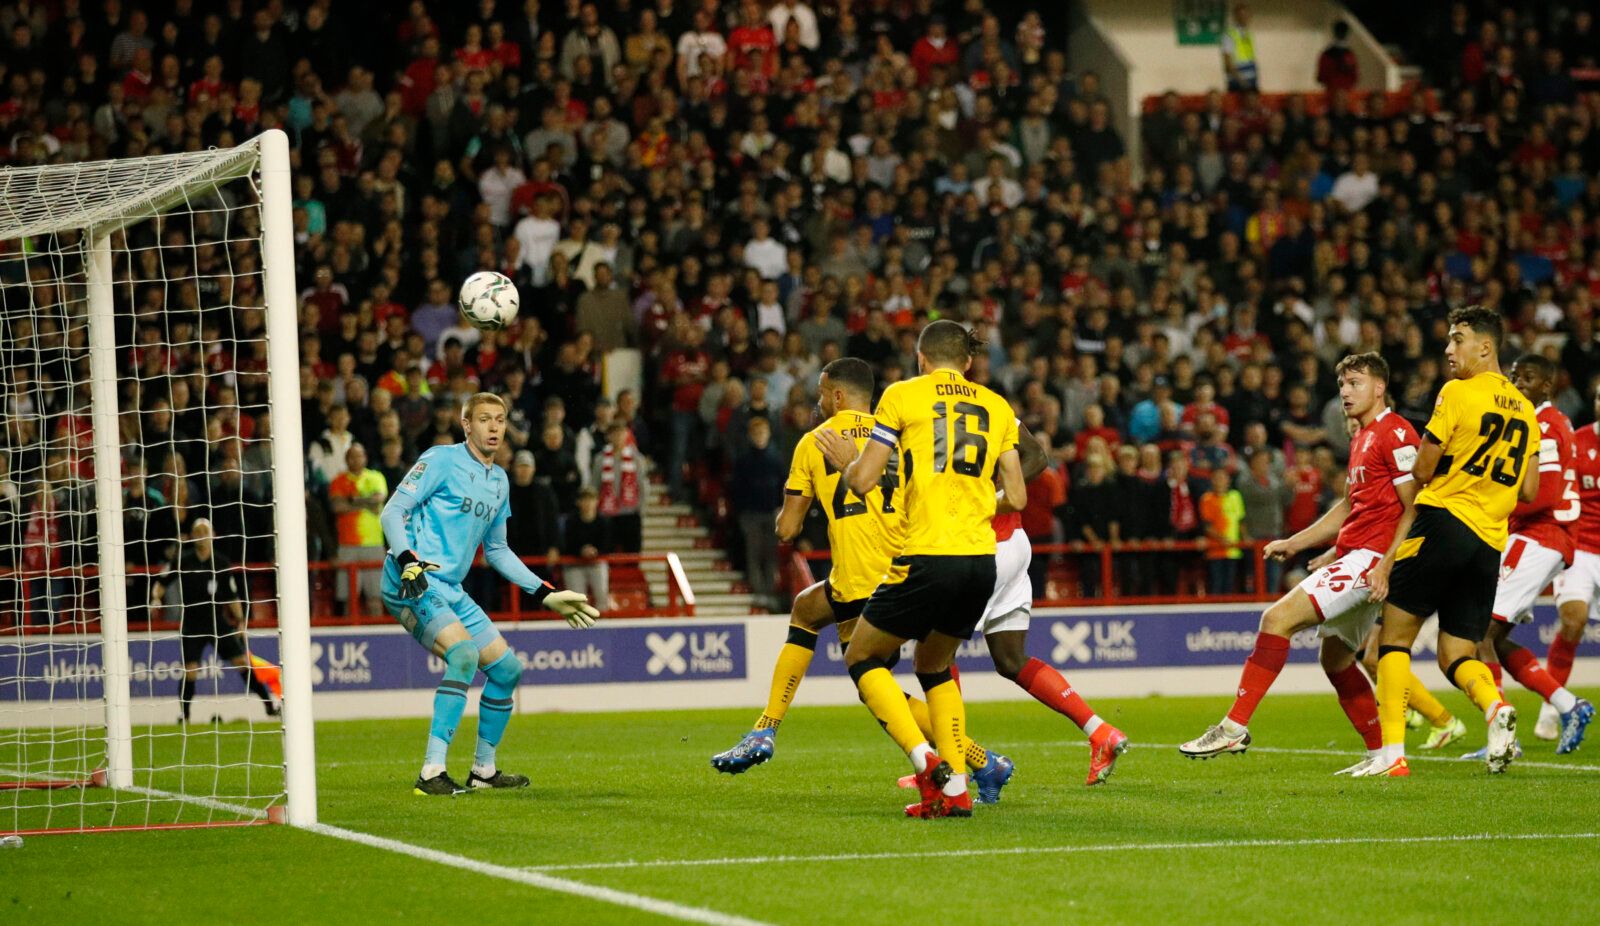 Soccer - England - Carabao Cup Second Round - Nottingham Forest v Wolverhampton Wanderers - The City Ground, Nottingham, Britain - August 24, 2021 Wolverhampton Wanderers' Romain Saiss scores their first goal Action Images via Reuters/Andrew Boyers